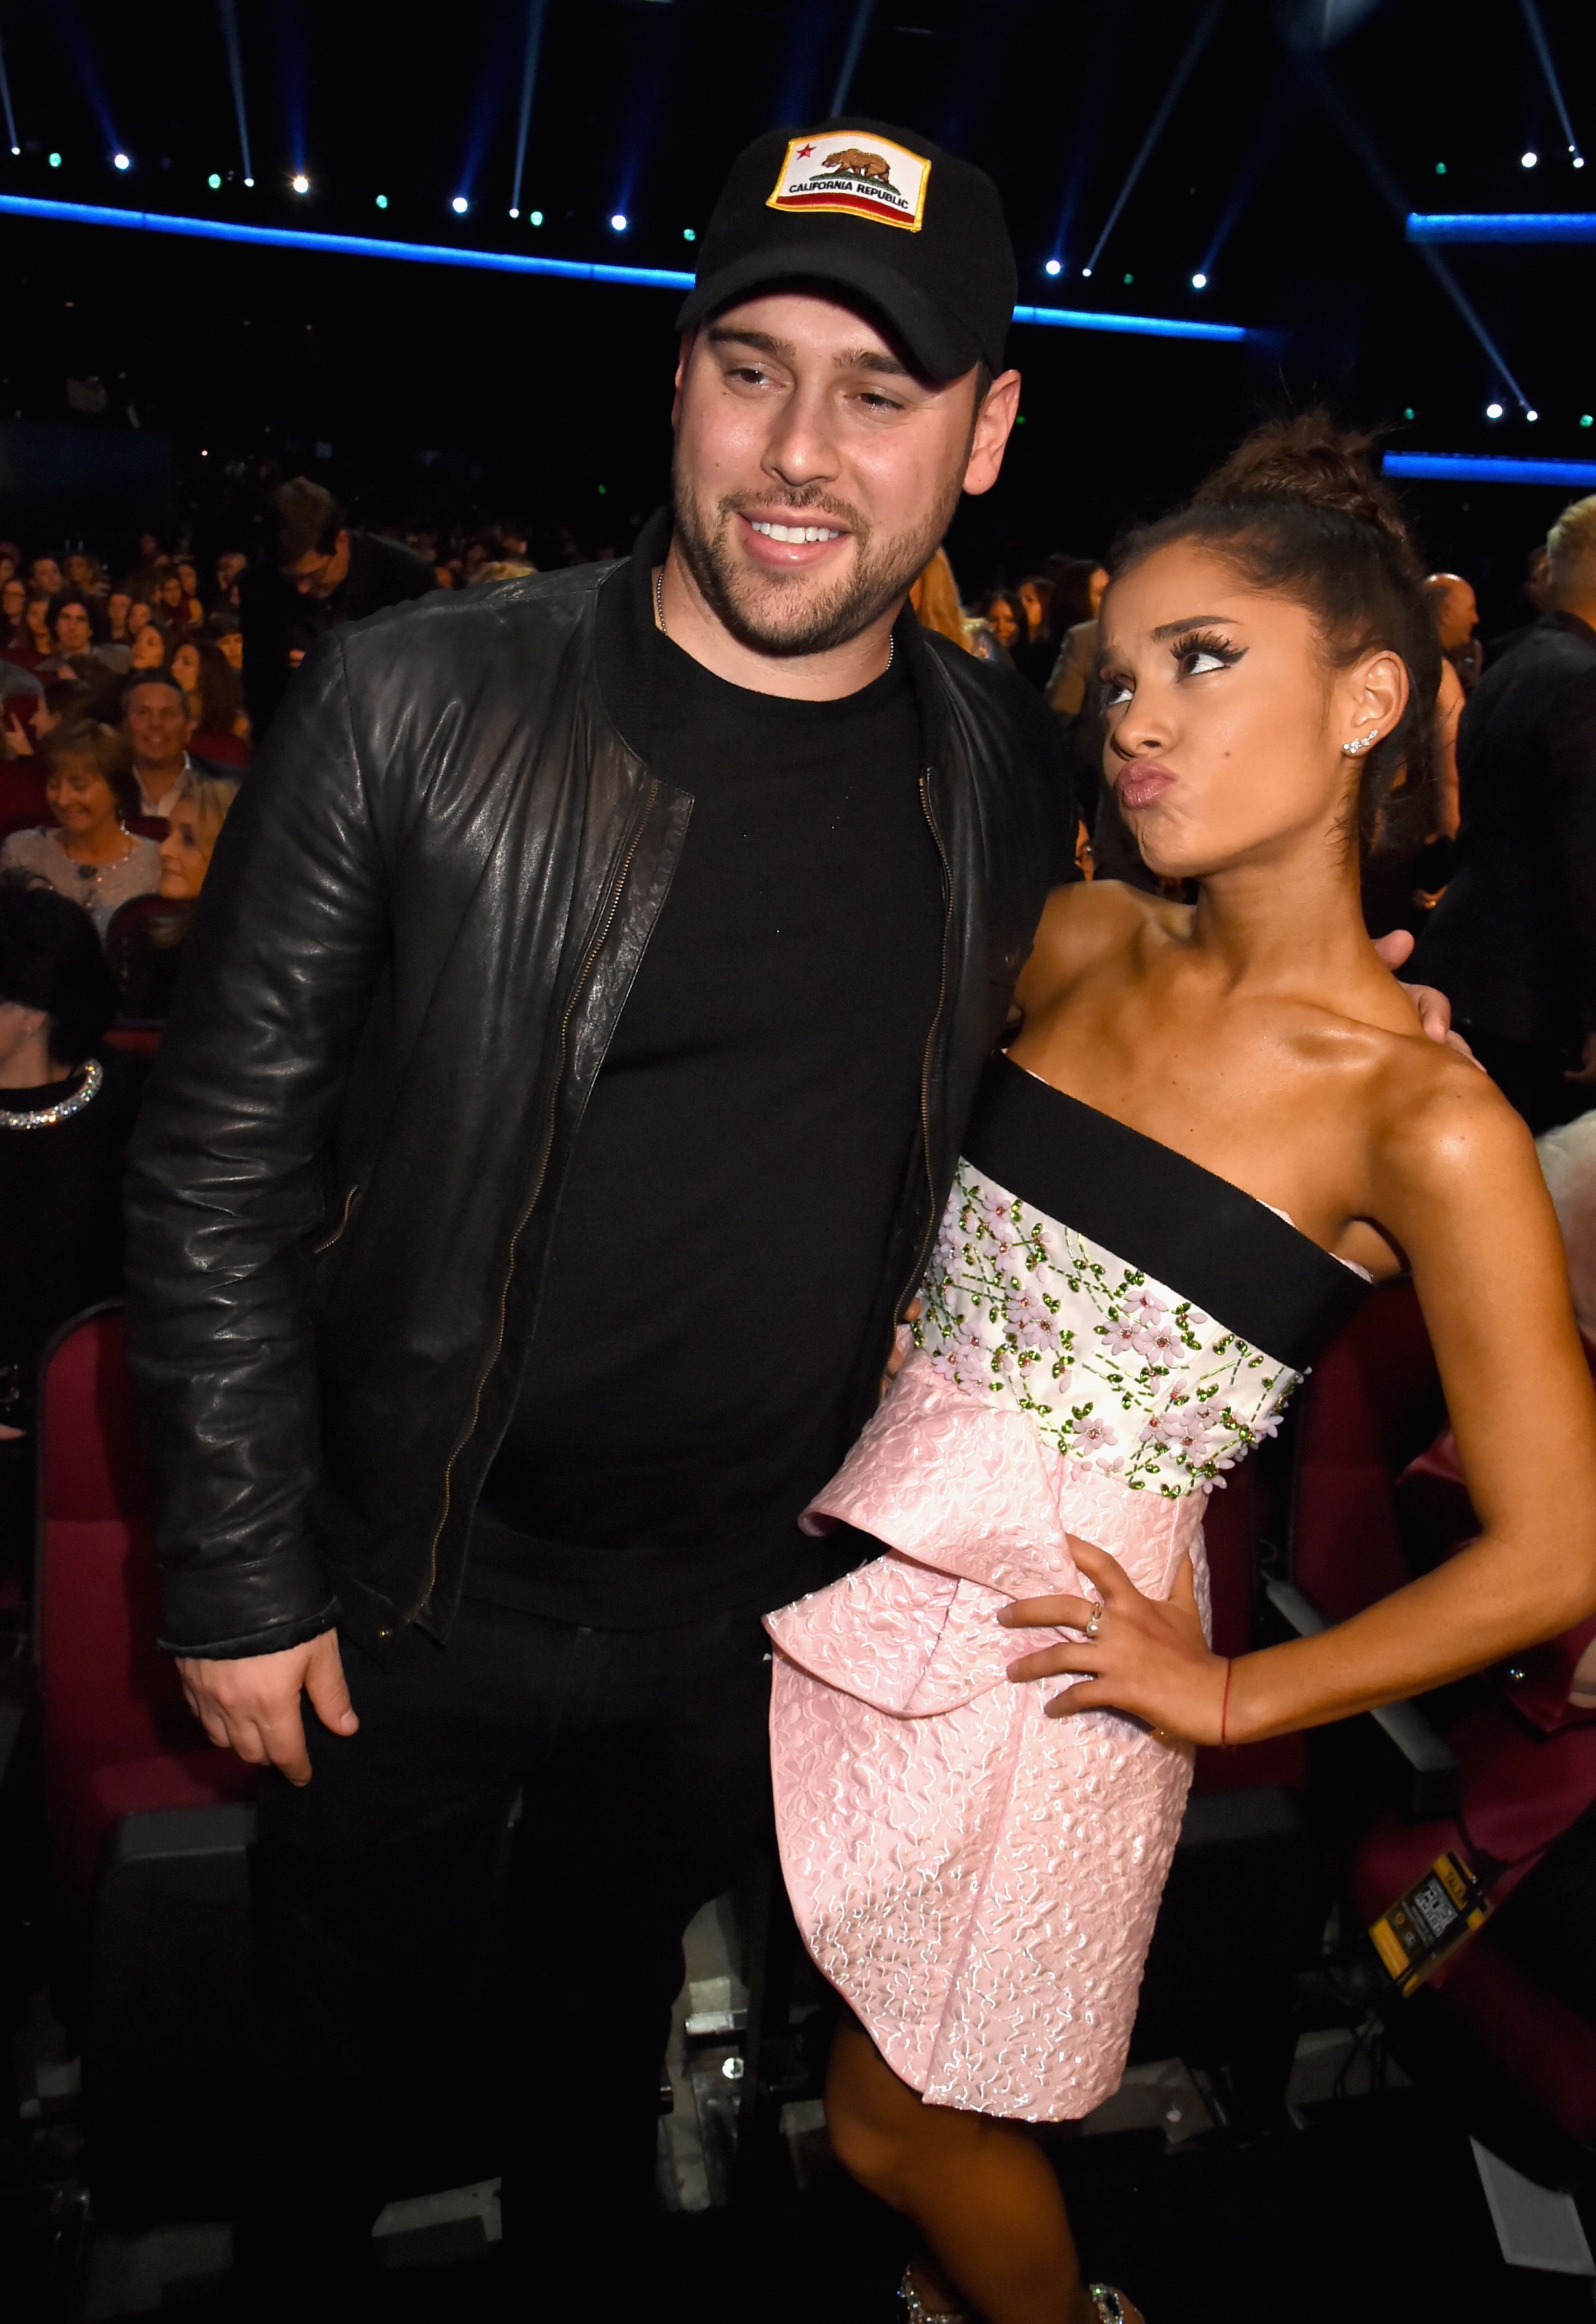 Ariana Grandes Manager Scooter Braun Talks About Shitty